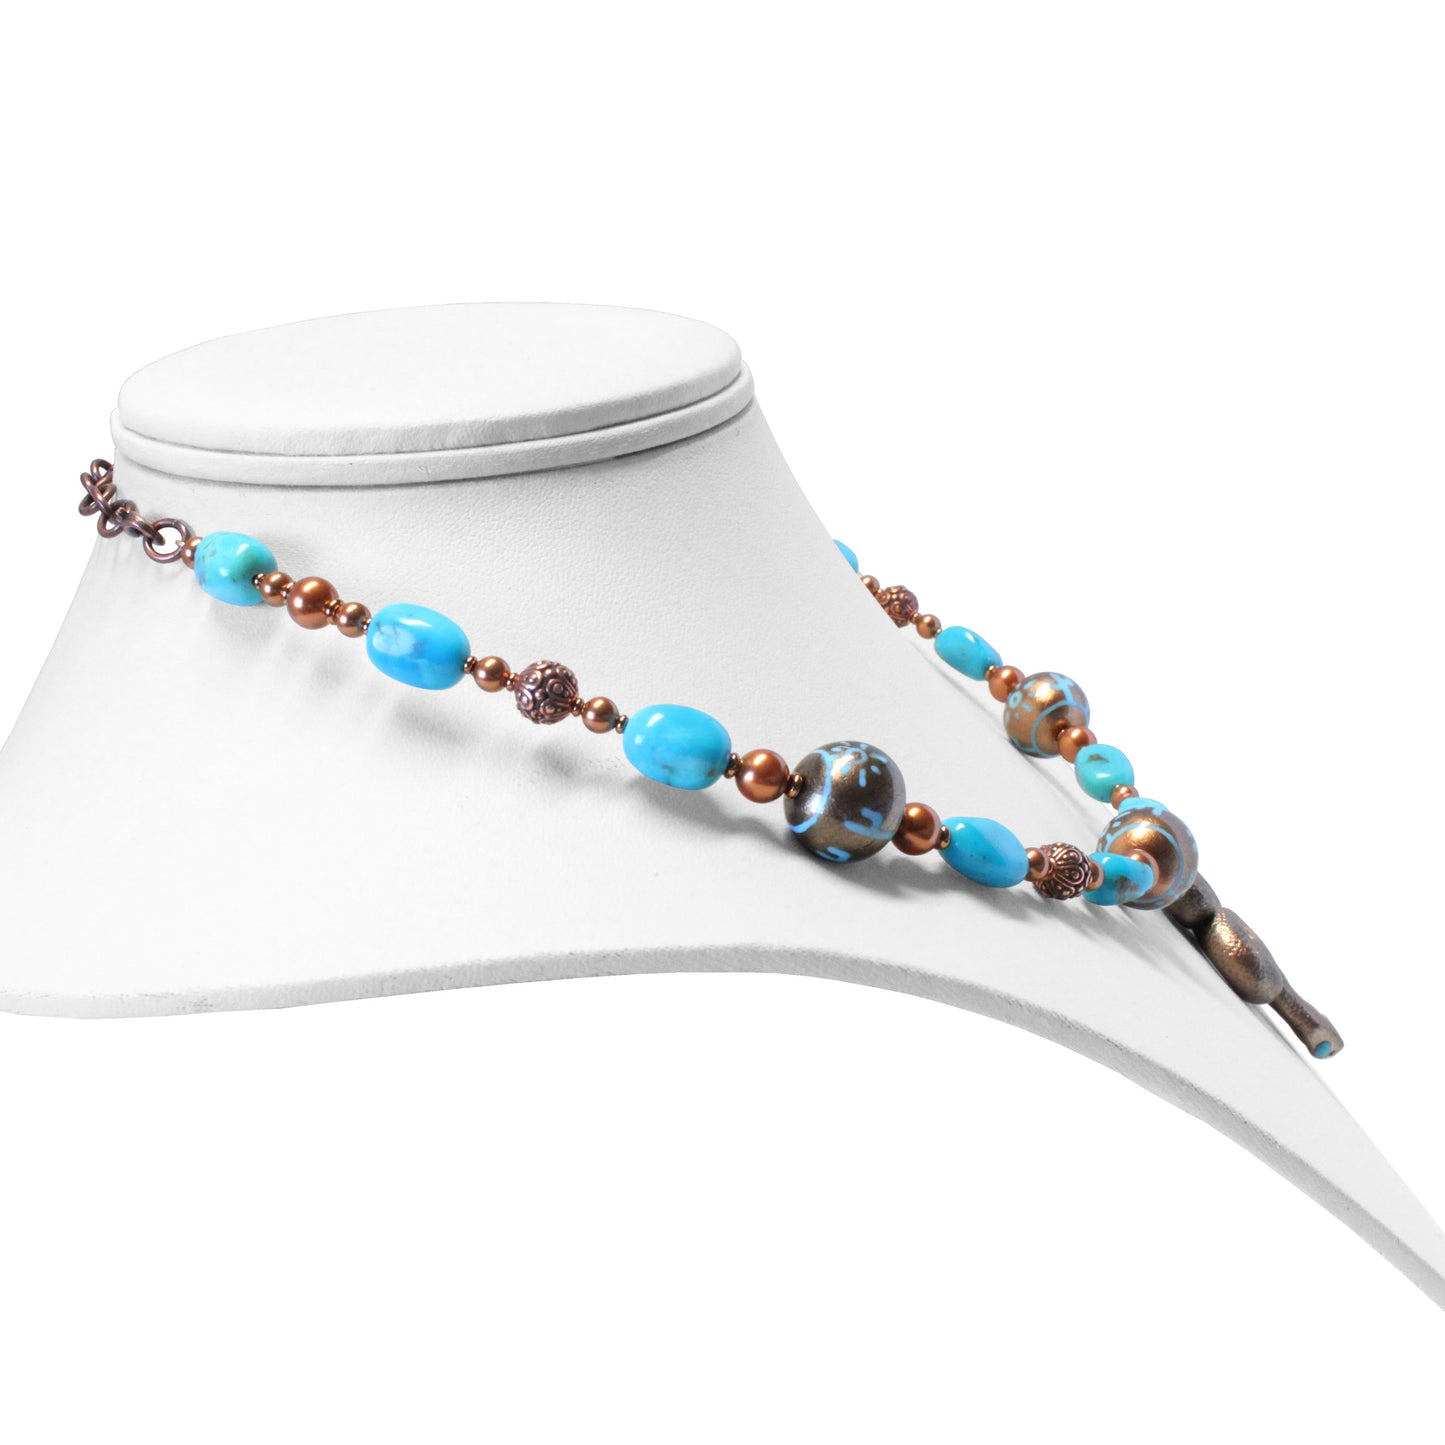 Turquoise Desert Scene Necklace / 16-18 Inch length / Nacozari turquoise gemstones /  hand-painted pendant and beads